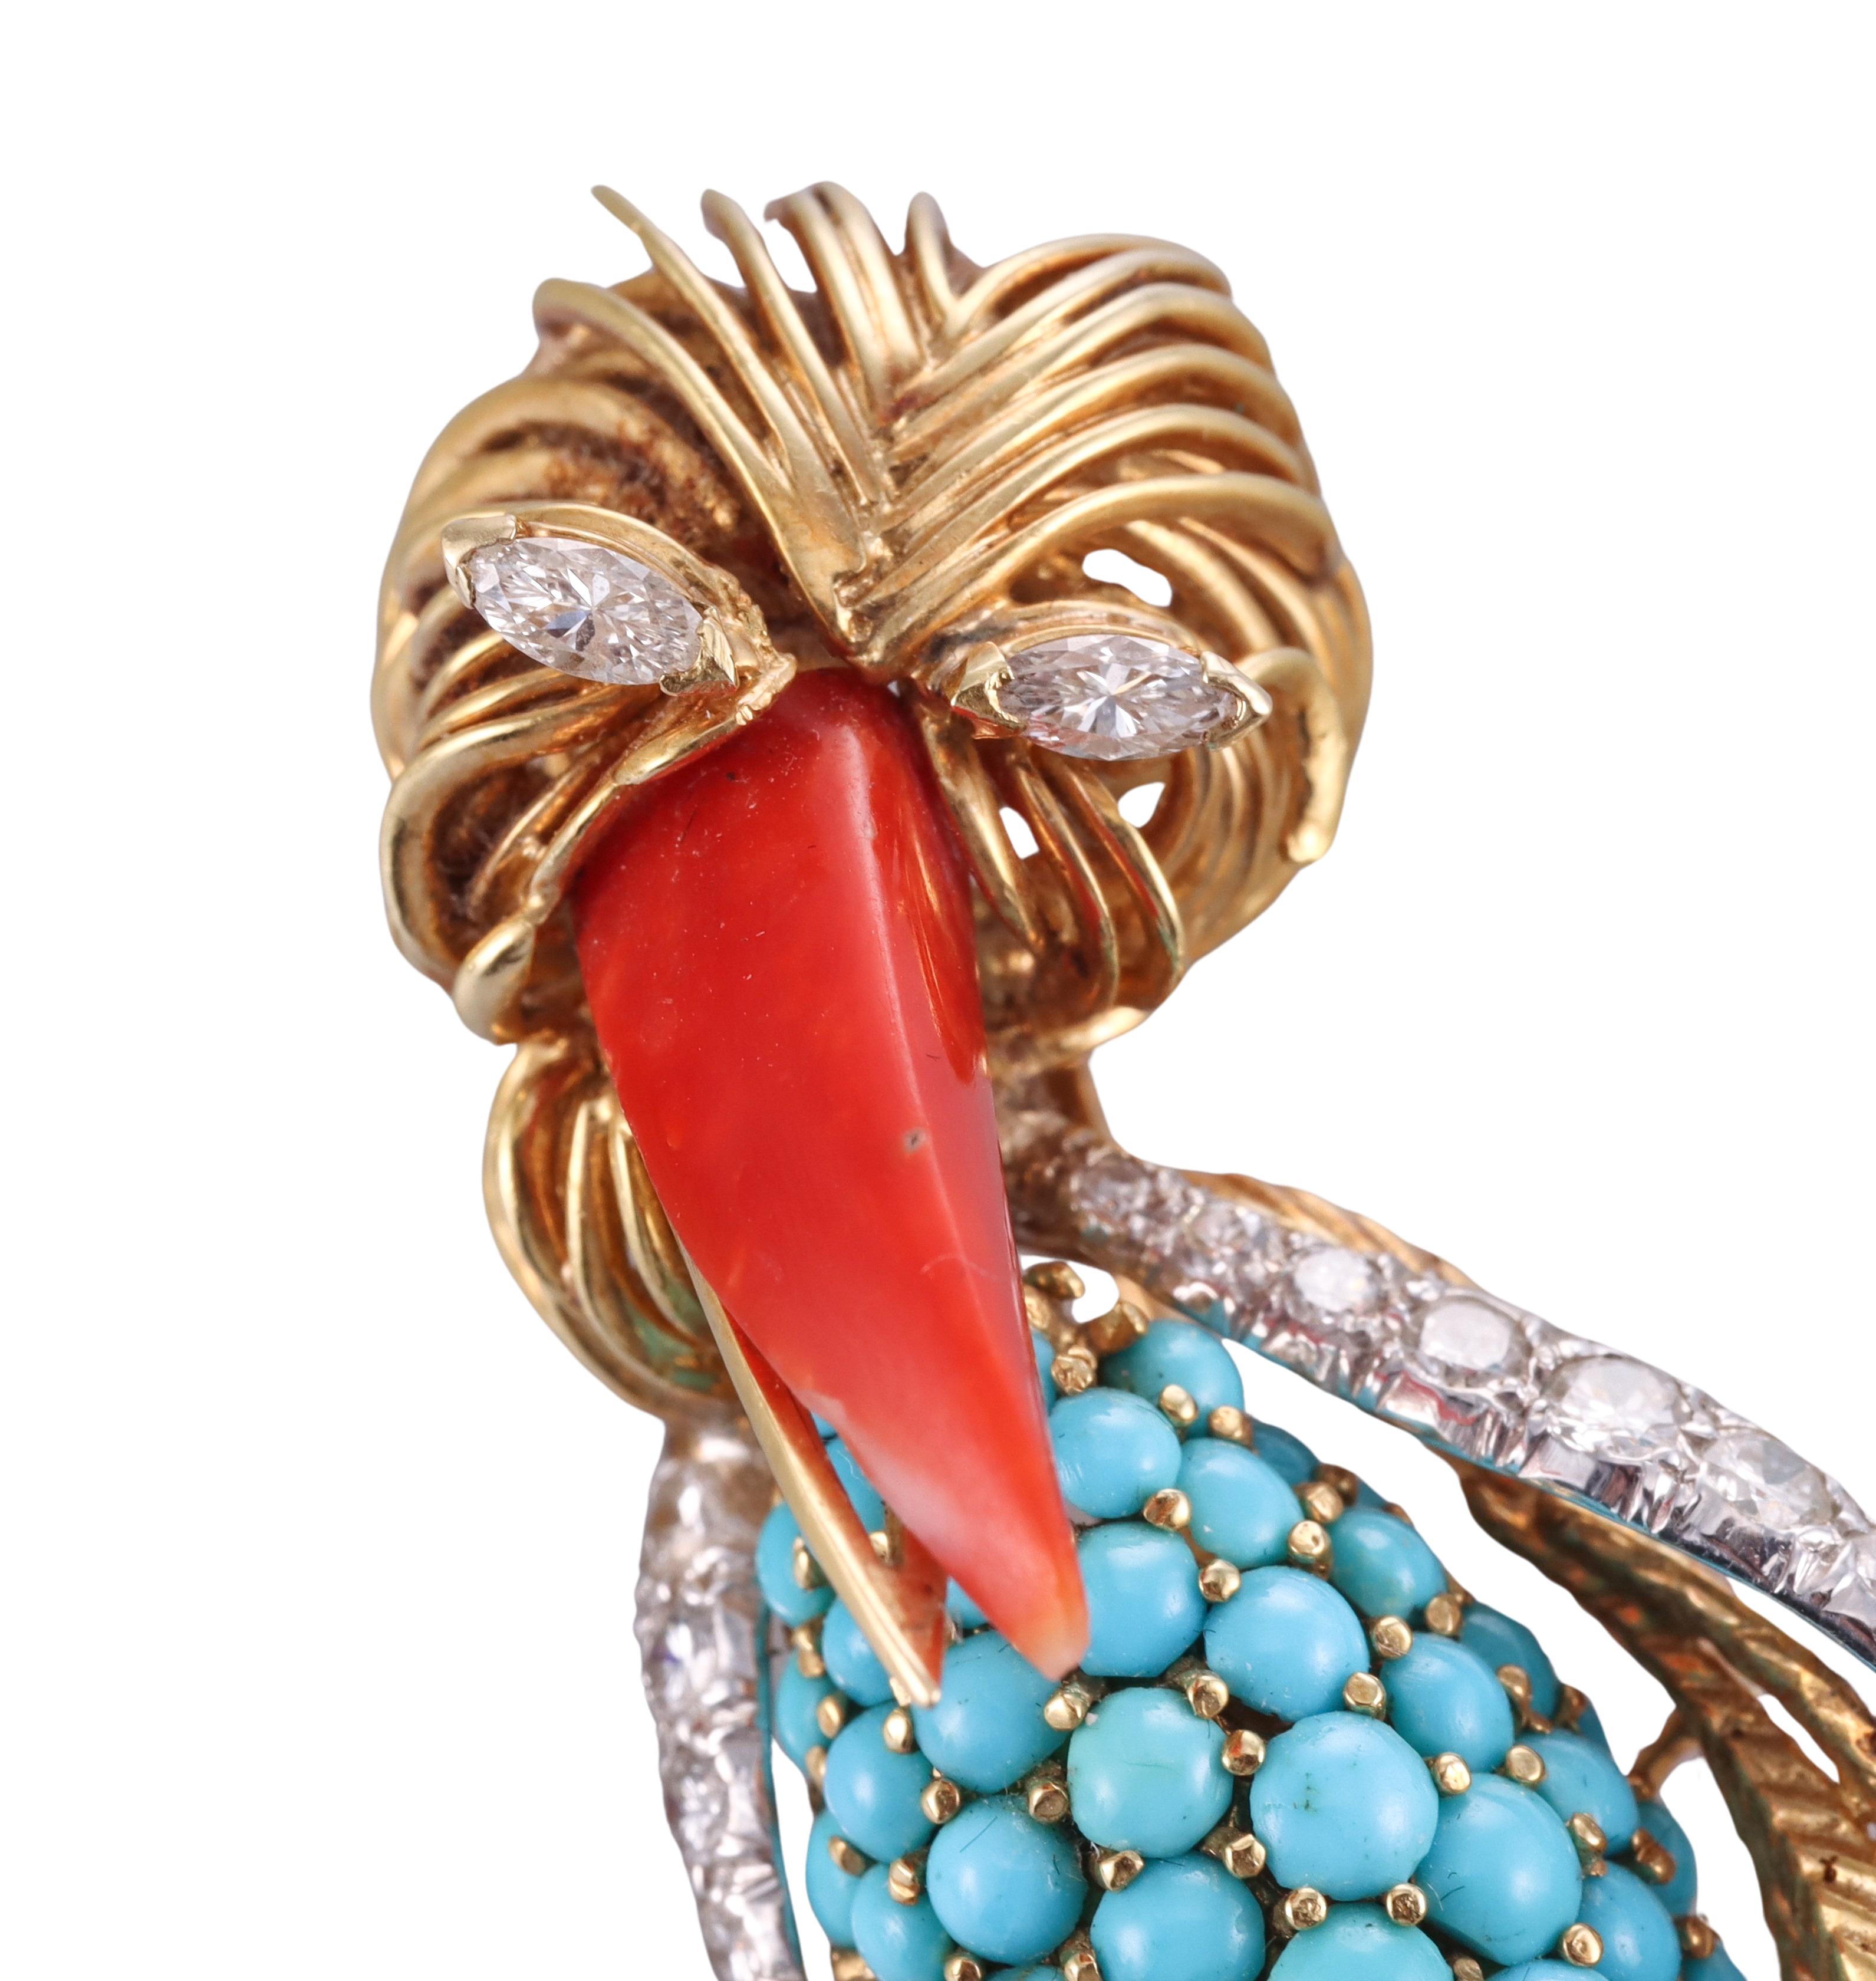 French made, circa 1960s 18k gold toucan brooch, adorned with turquoise, coral beak and approx. 0.80ctw G/VS-SI1 diamonds. Brooch measures 3.25